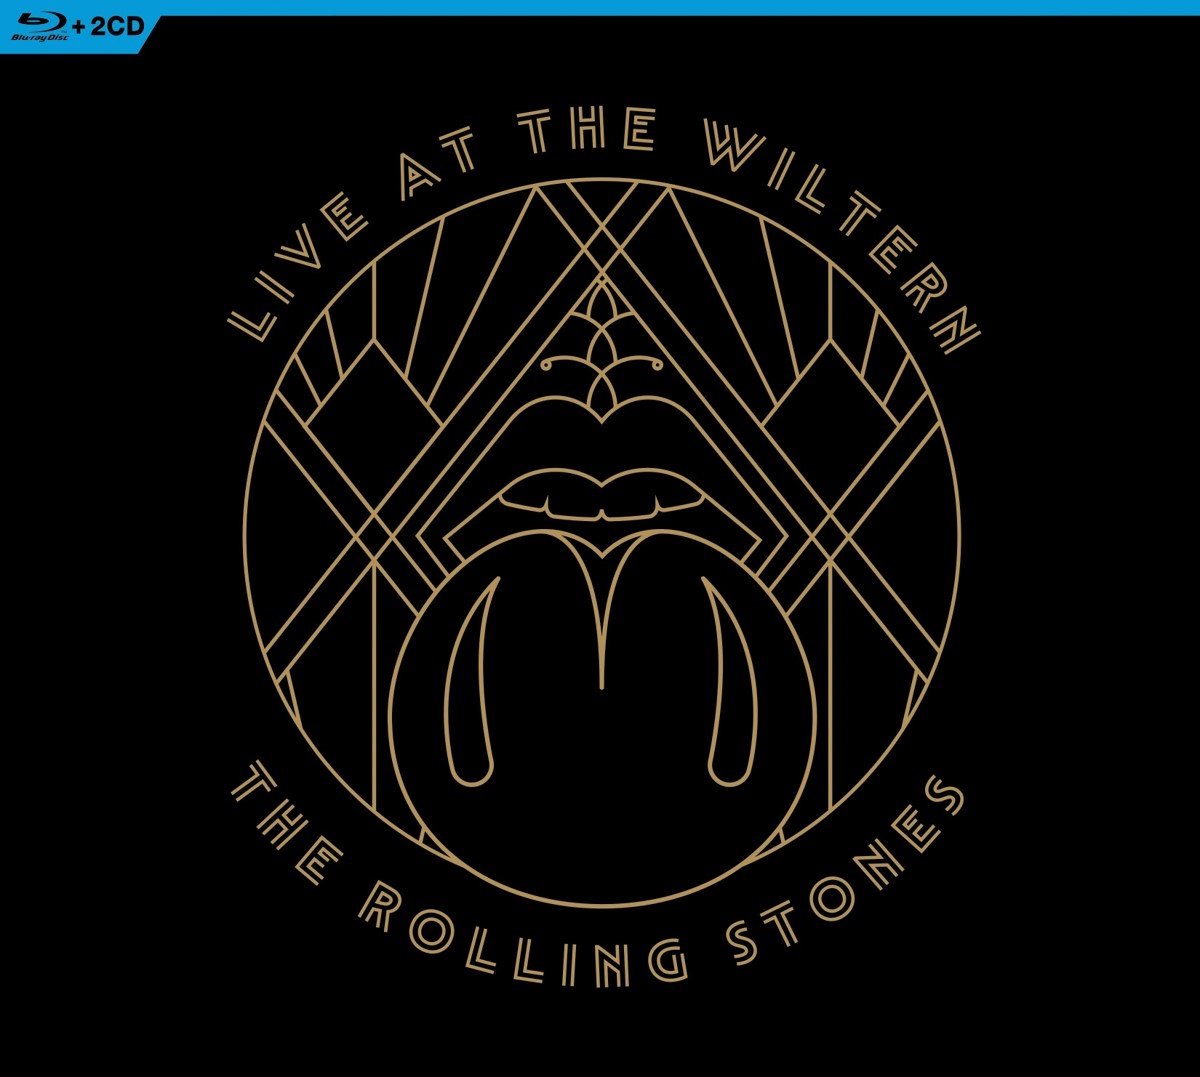 The Rolling Stones - Live At The Wiltern (Blu-ray) - Rolling Stones